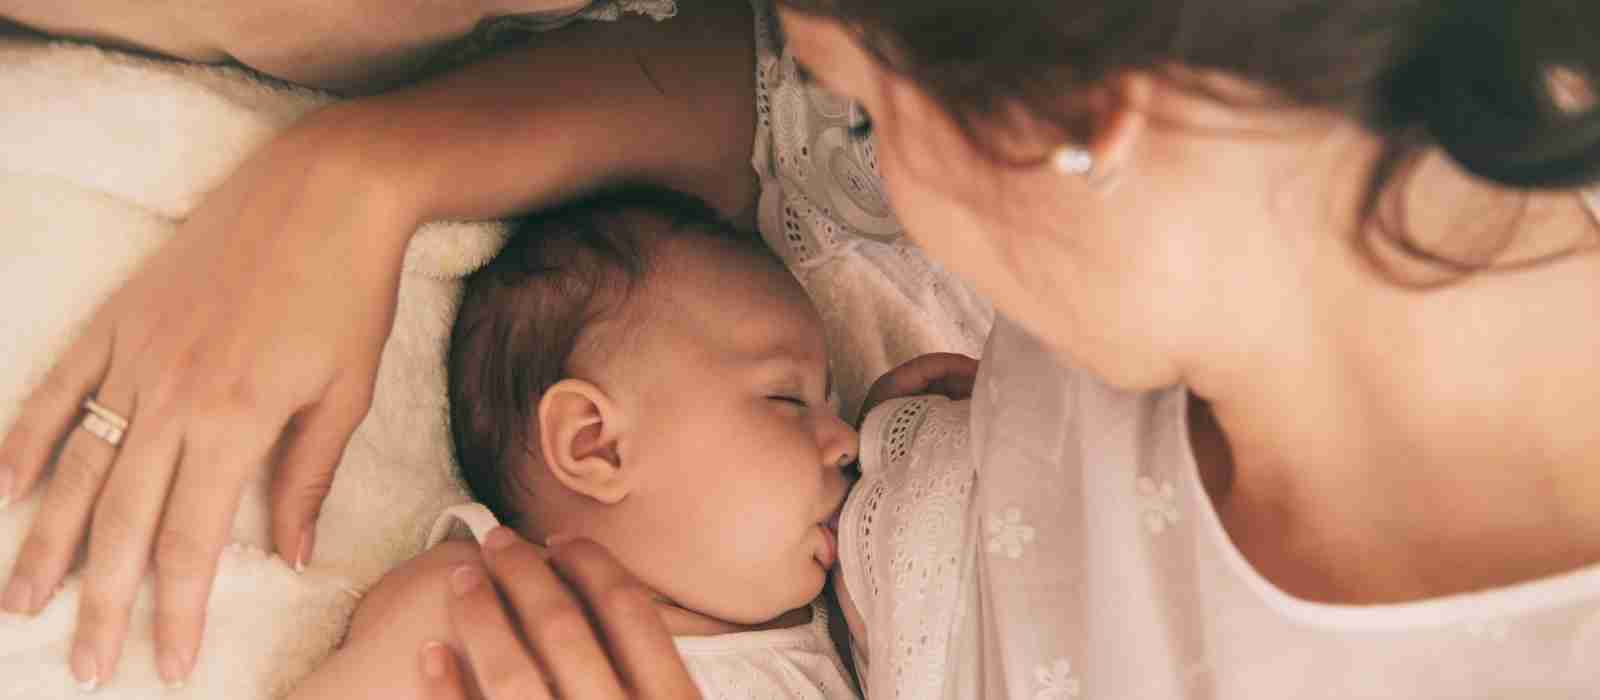 How Do I Know if My Baby Is Getting Enough Breastmilk